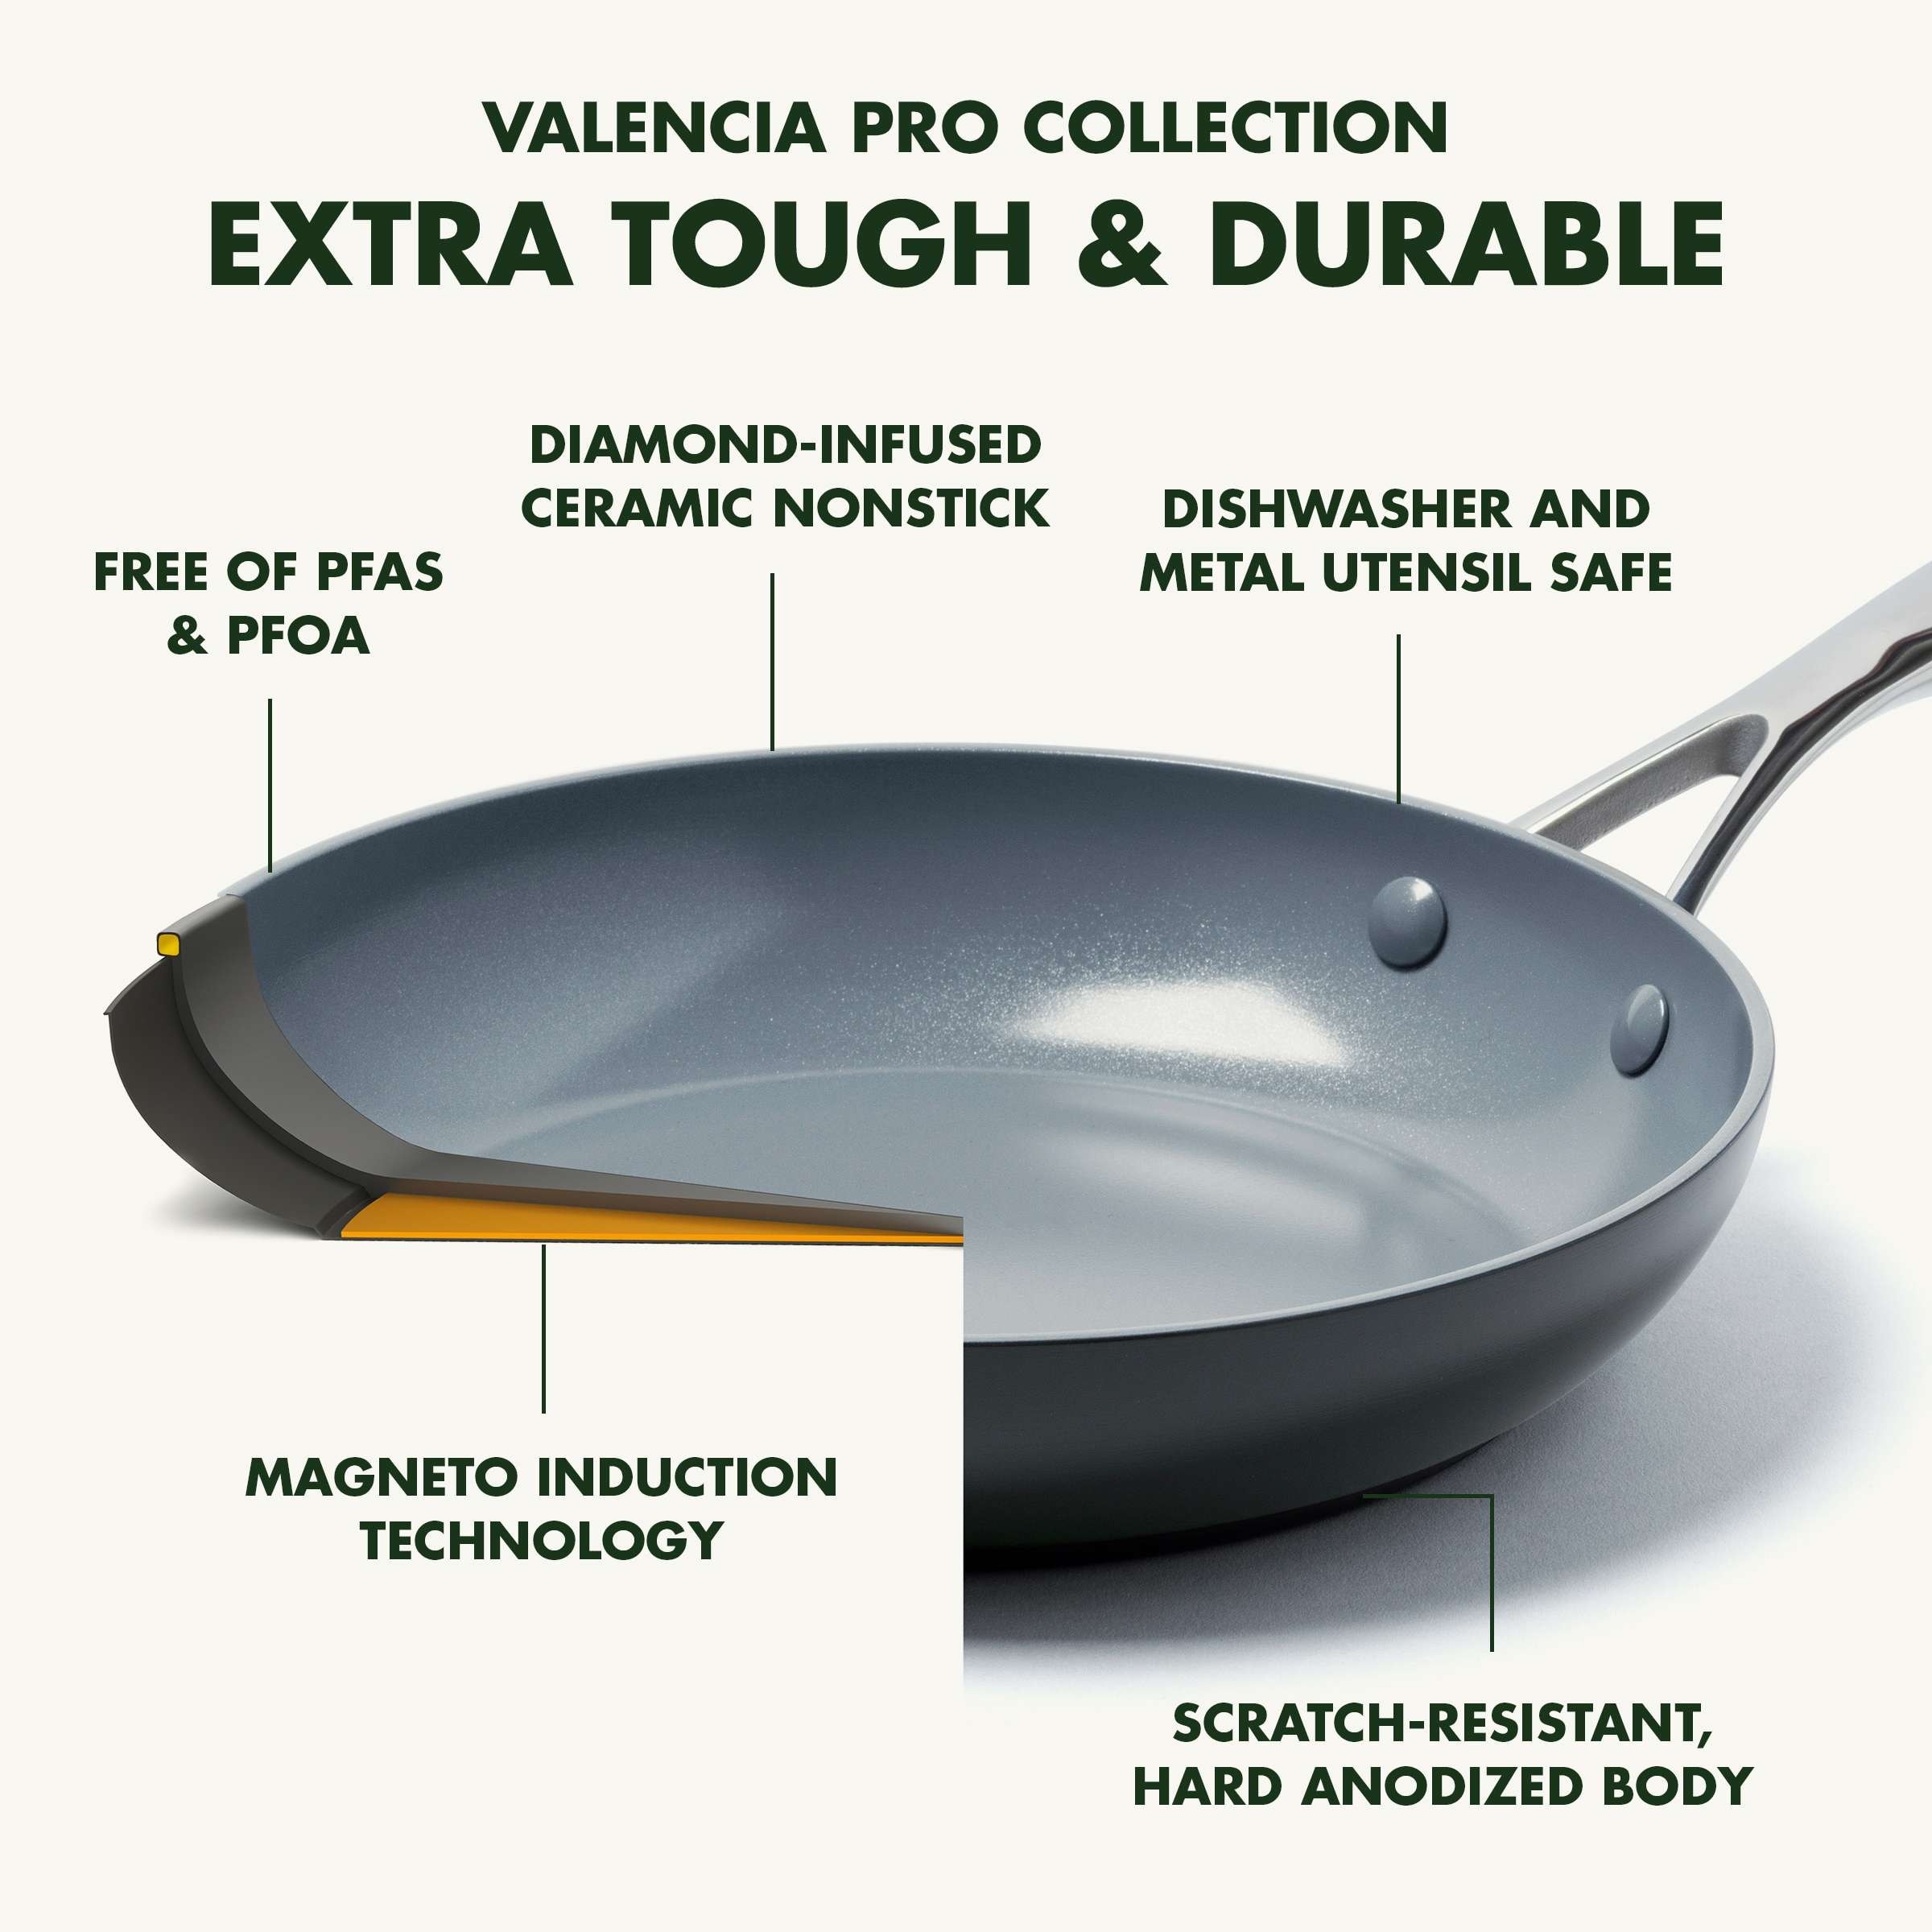 GreenPan Valencia Pro Hard-Anodized Induction Safe Healthy Ceramic Non-stick  Saute Pan with Lid 4.5 QT - Bed Bath & Beyond - 33763690